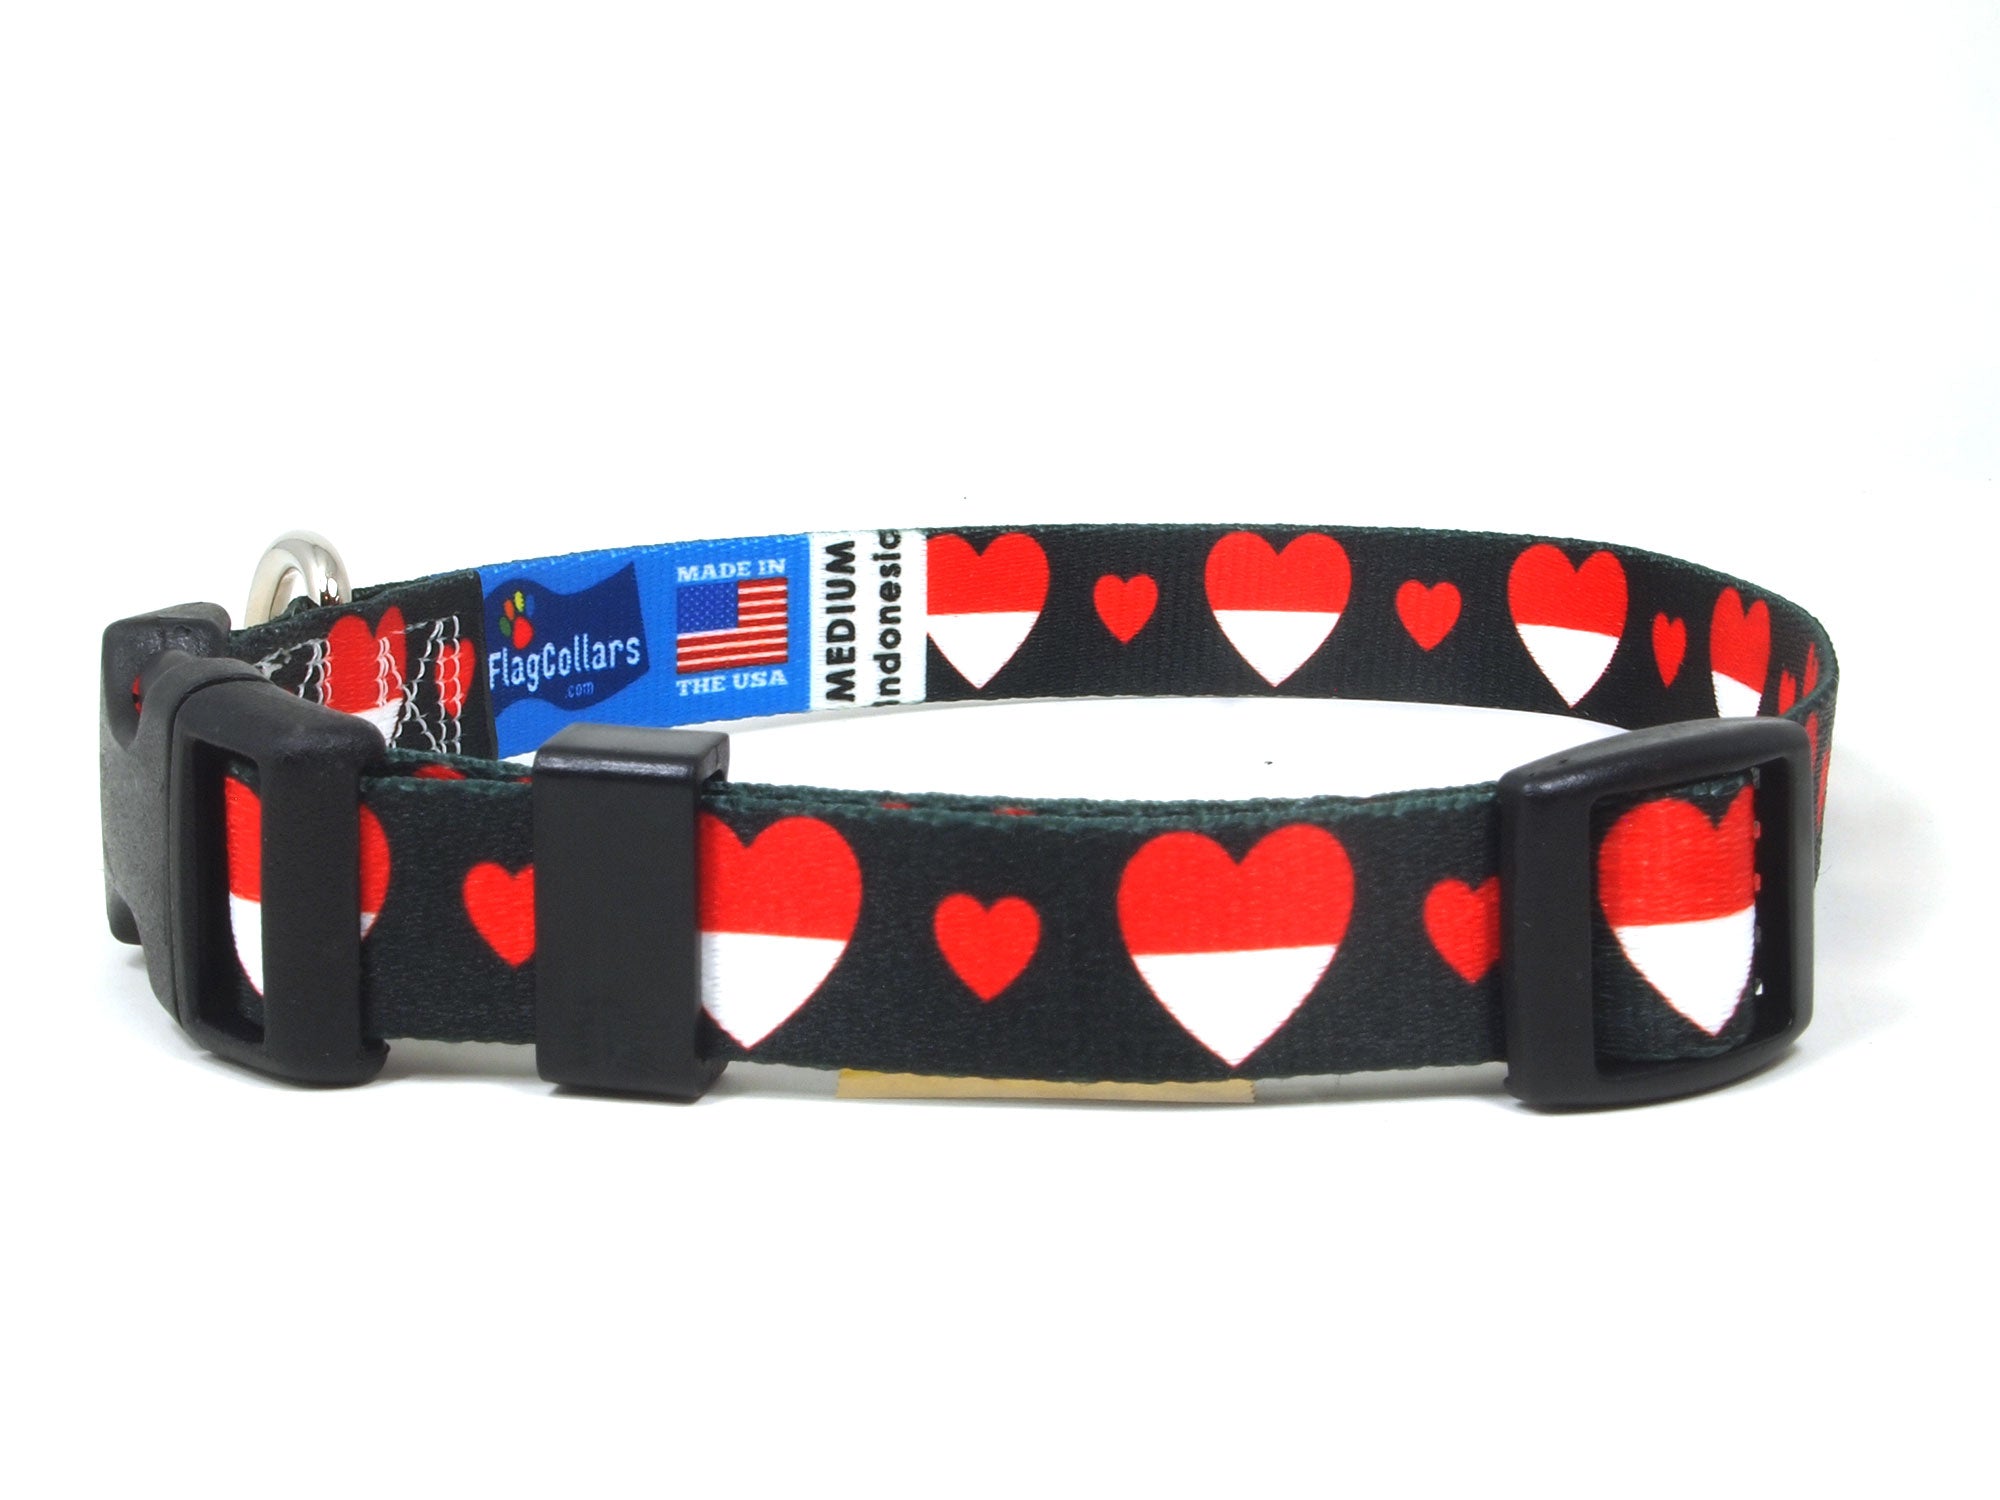 Dog Collar with Indonesia Hearts Pattern | I Love Indonesia